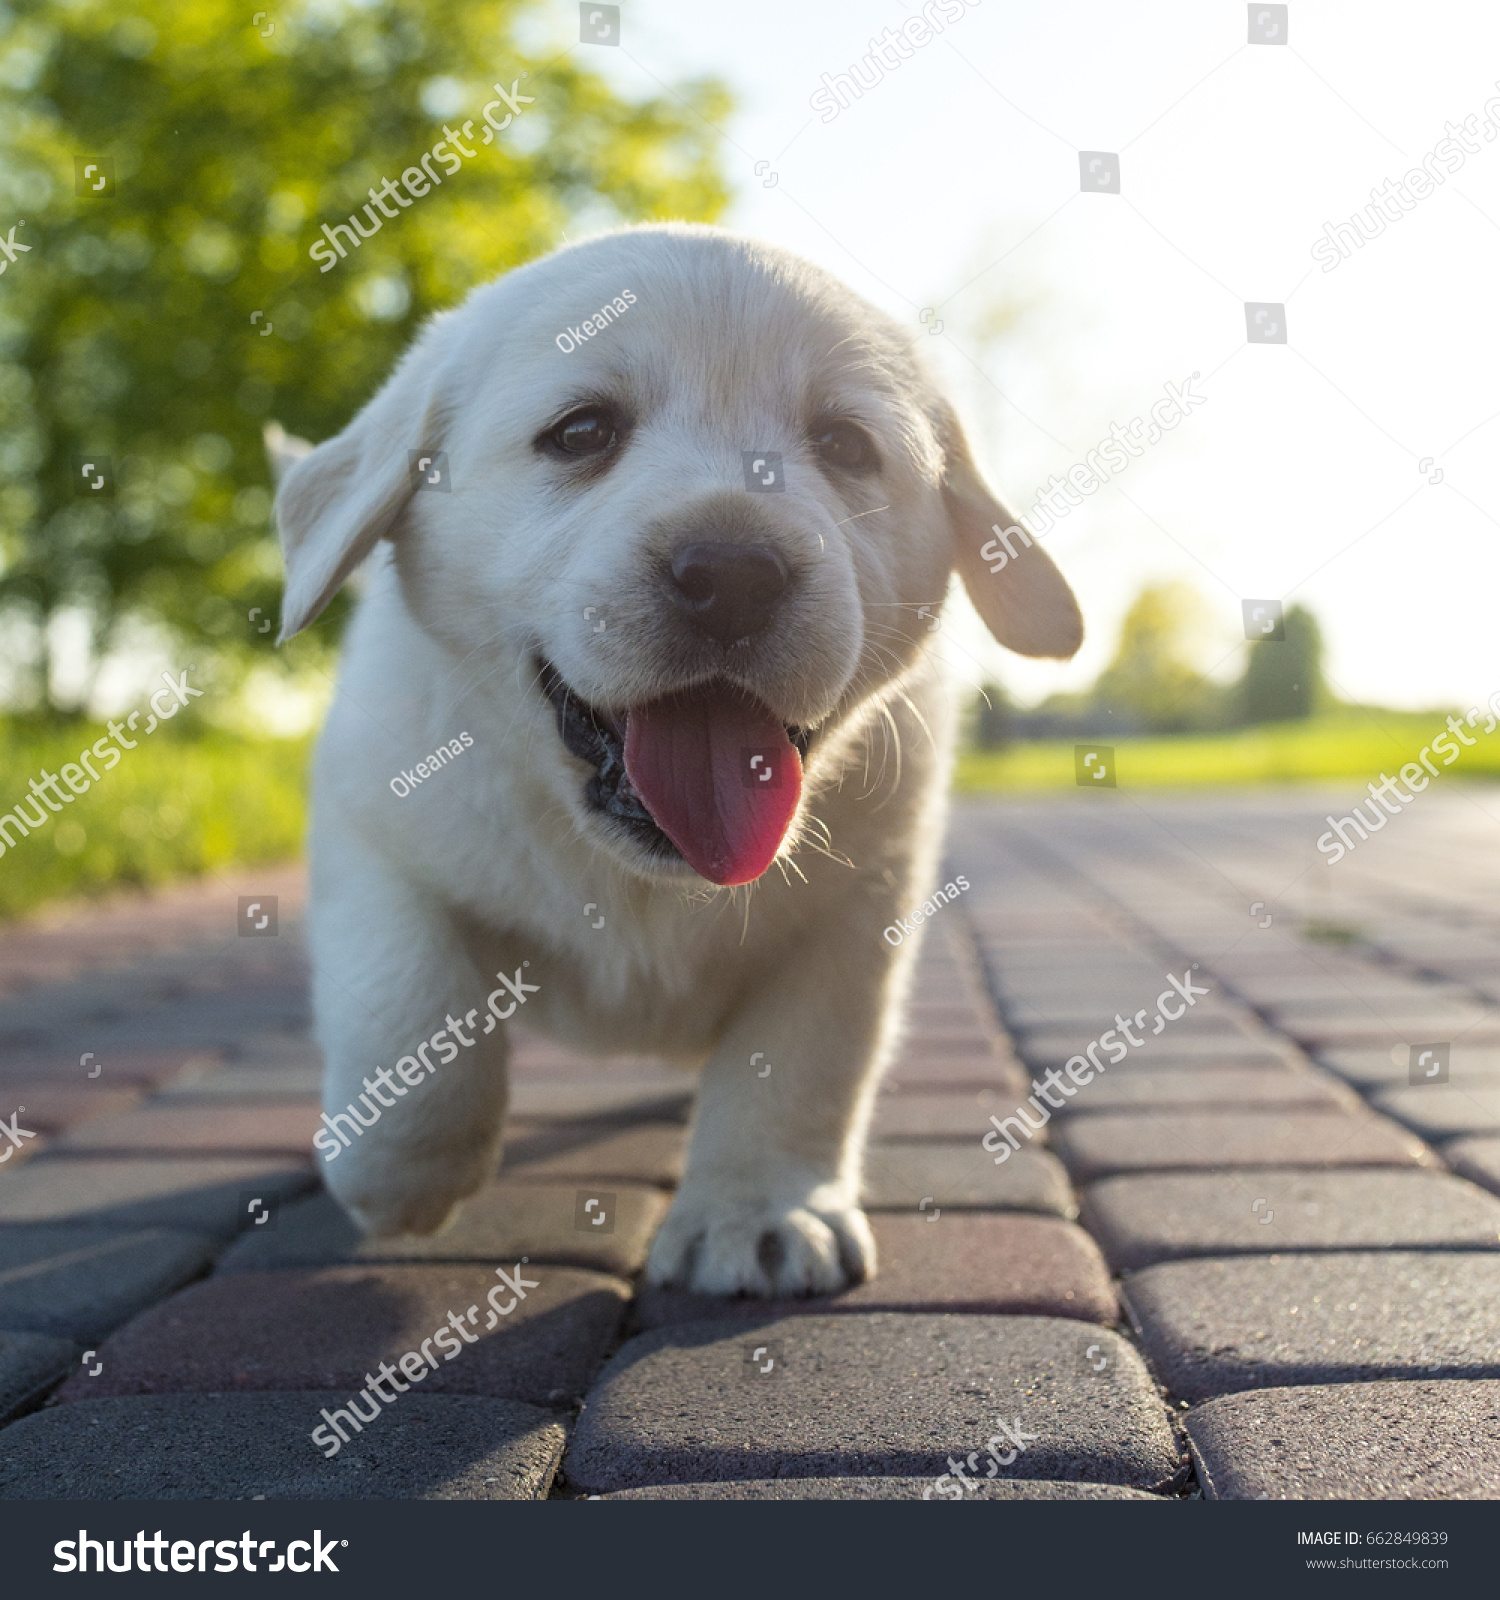 Lucky Sunny Puppy Stock Photo (Royalty Free) 662849839 - Shutterstock